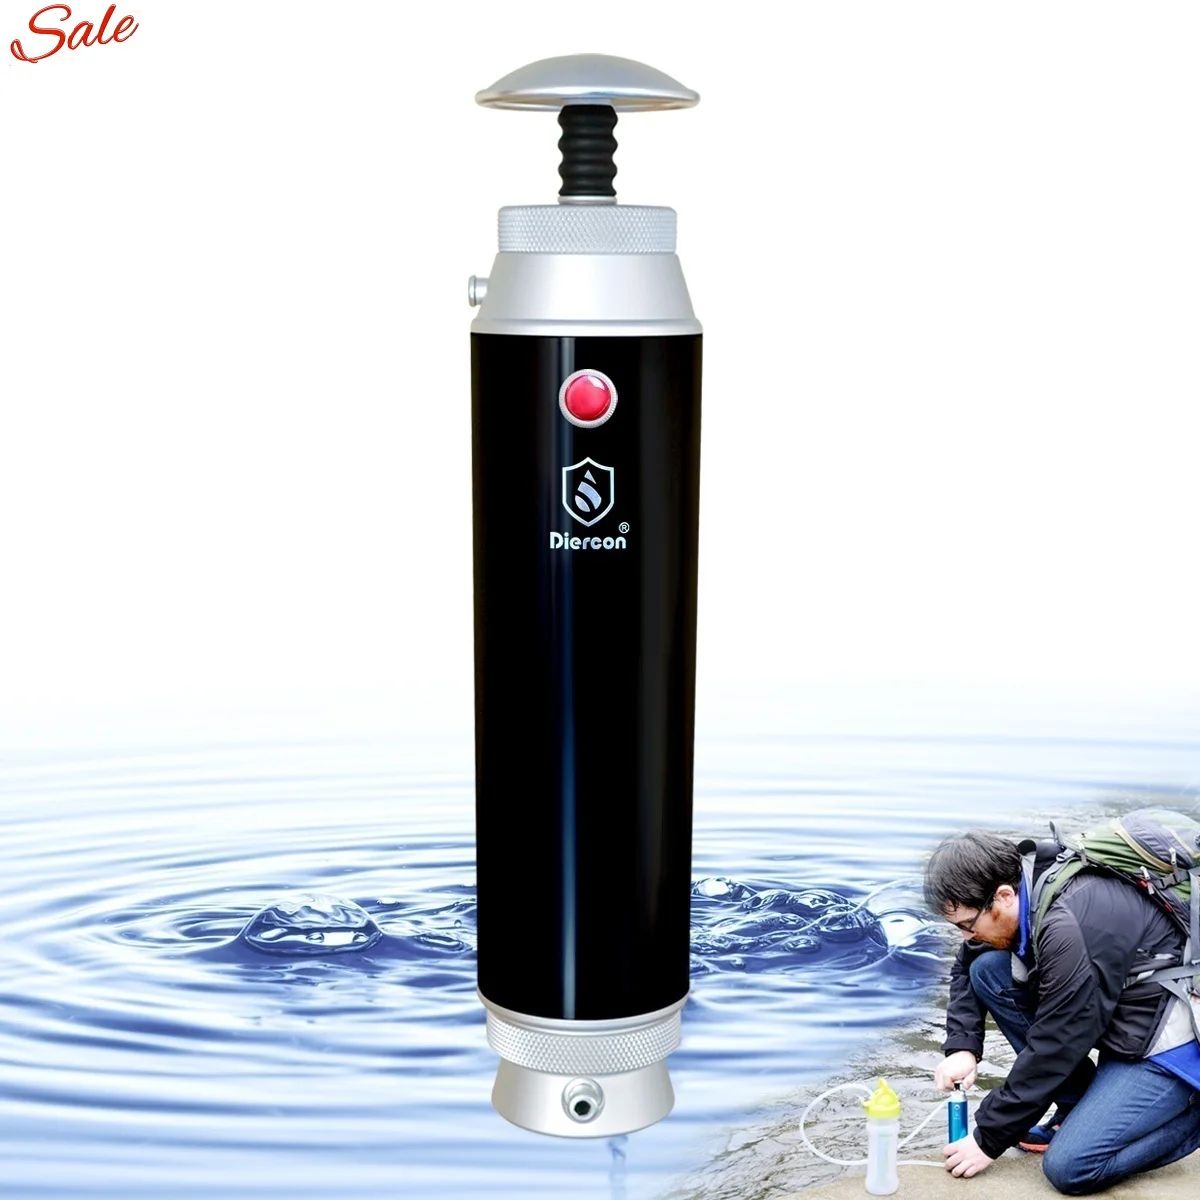 

Diercon Hot Sales Portable Water Purifier The Expedition Water filter have a 99.9999% filtration rate for Outdoor (KP01)